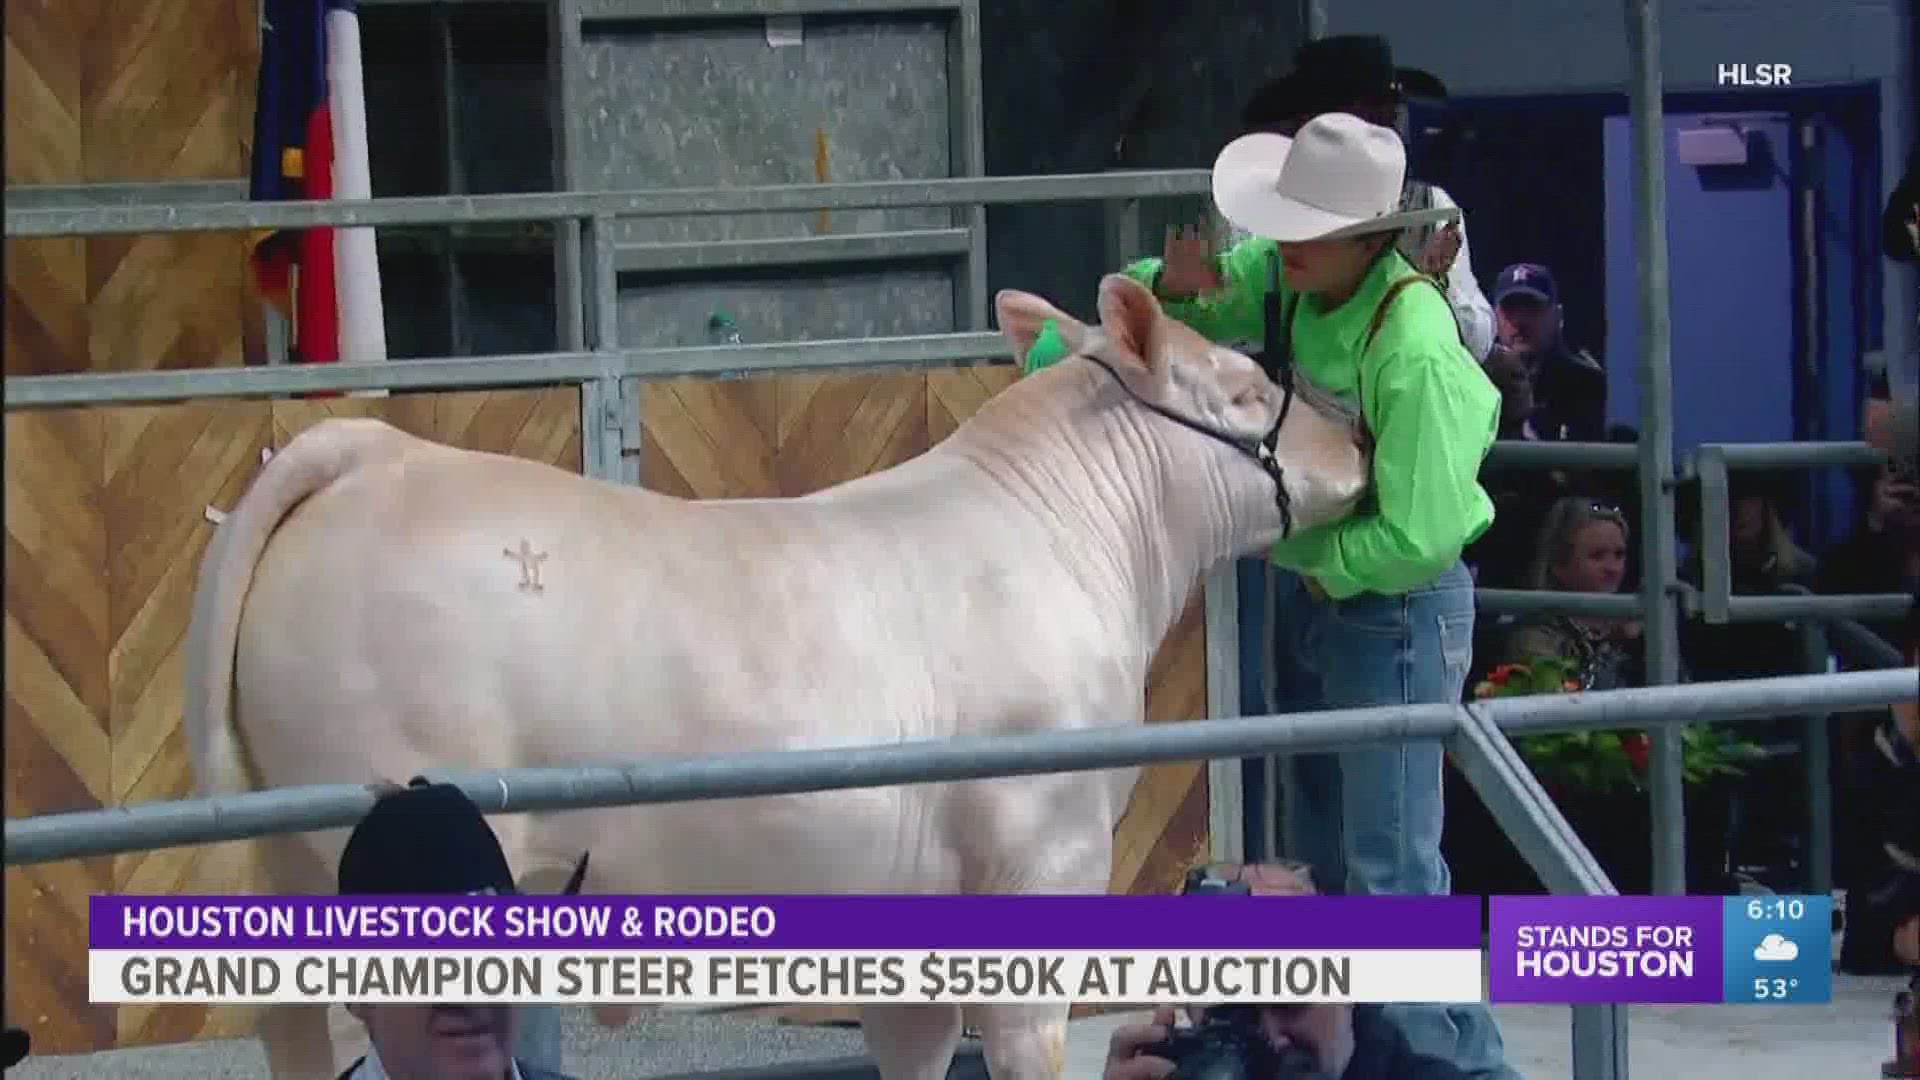 Last year's Grand Champion steer sold at auction for $1 million.